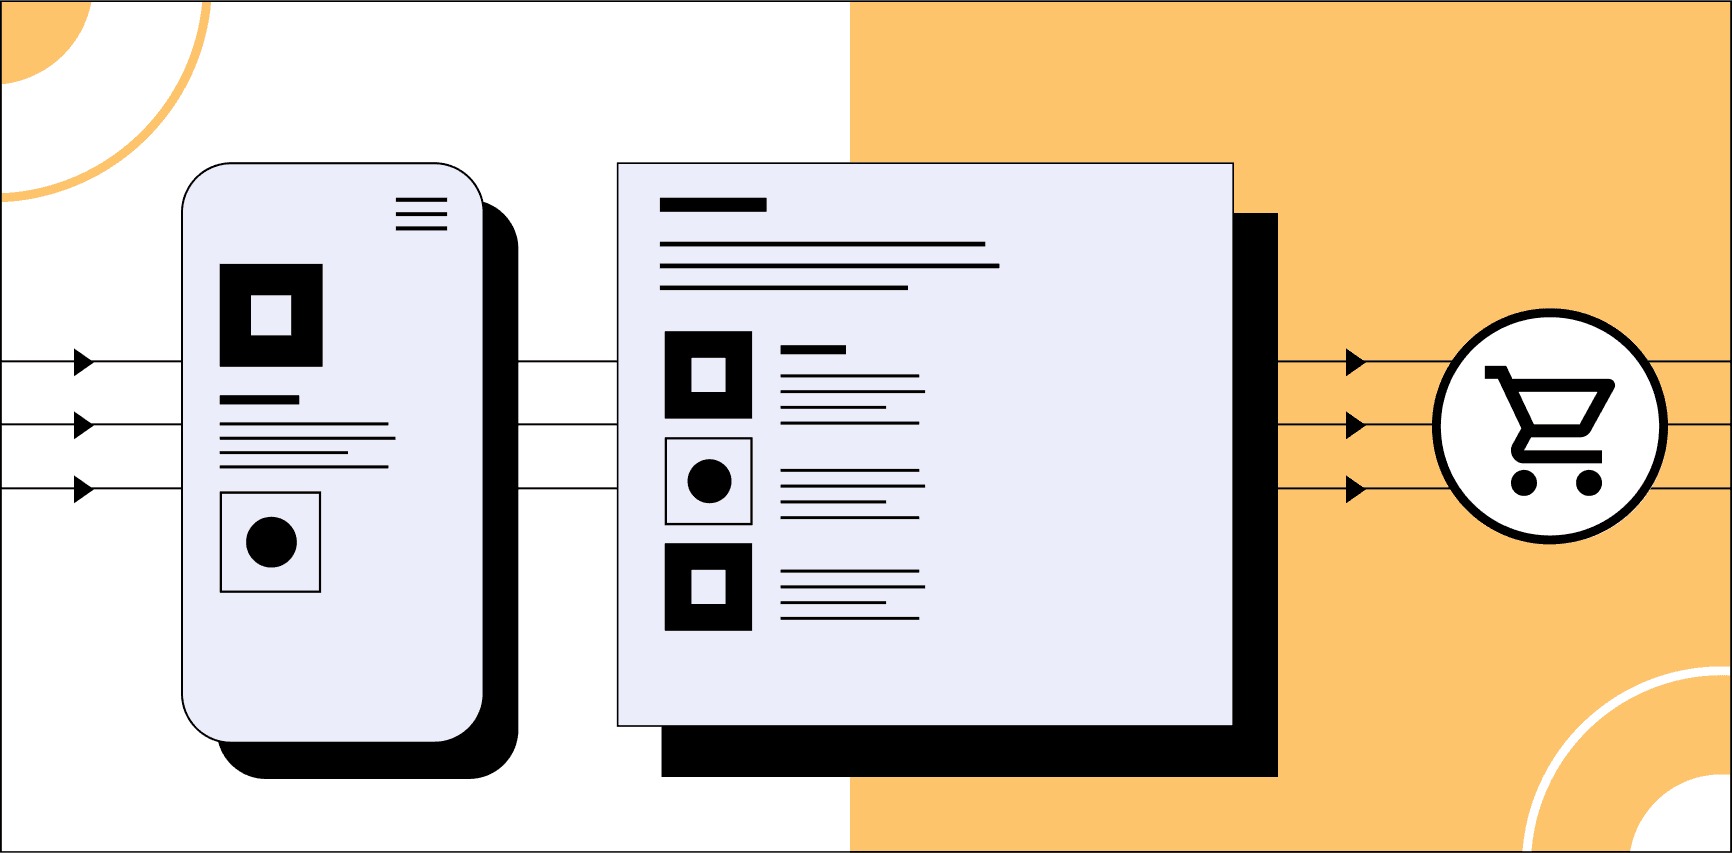 A mobile and a desktop webpage side by side backed by lines and arrows leading from left to right. The arrows lead to a shopping cart icon on the right. Illustration.